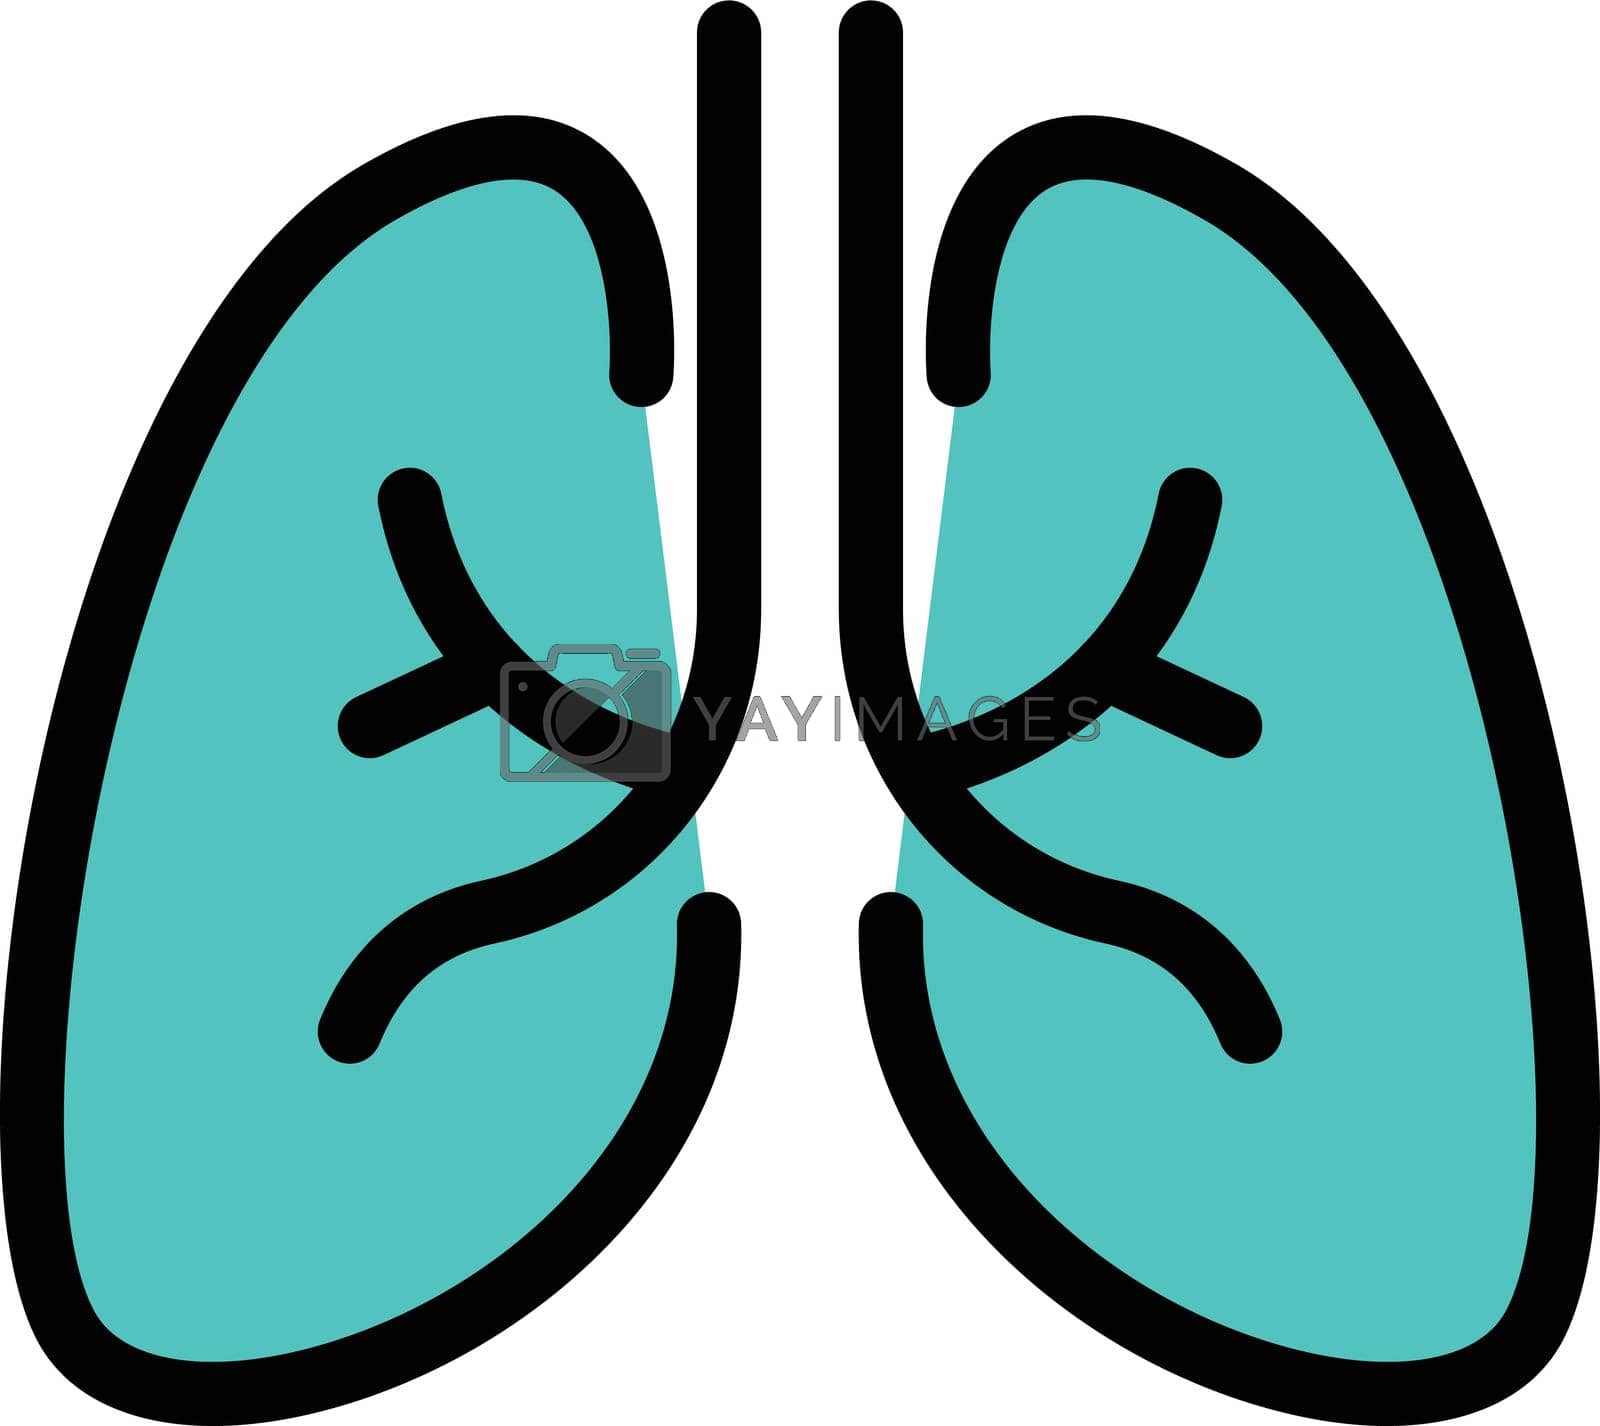 Royalty free image of lungs by FlaticonsDesign